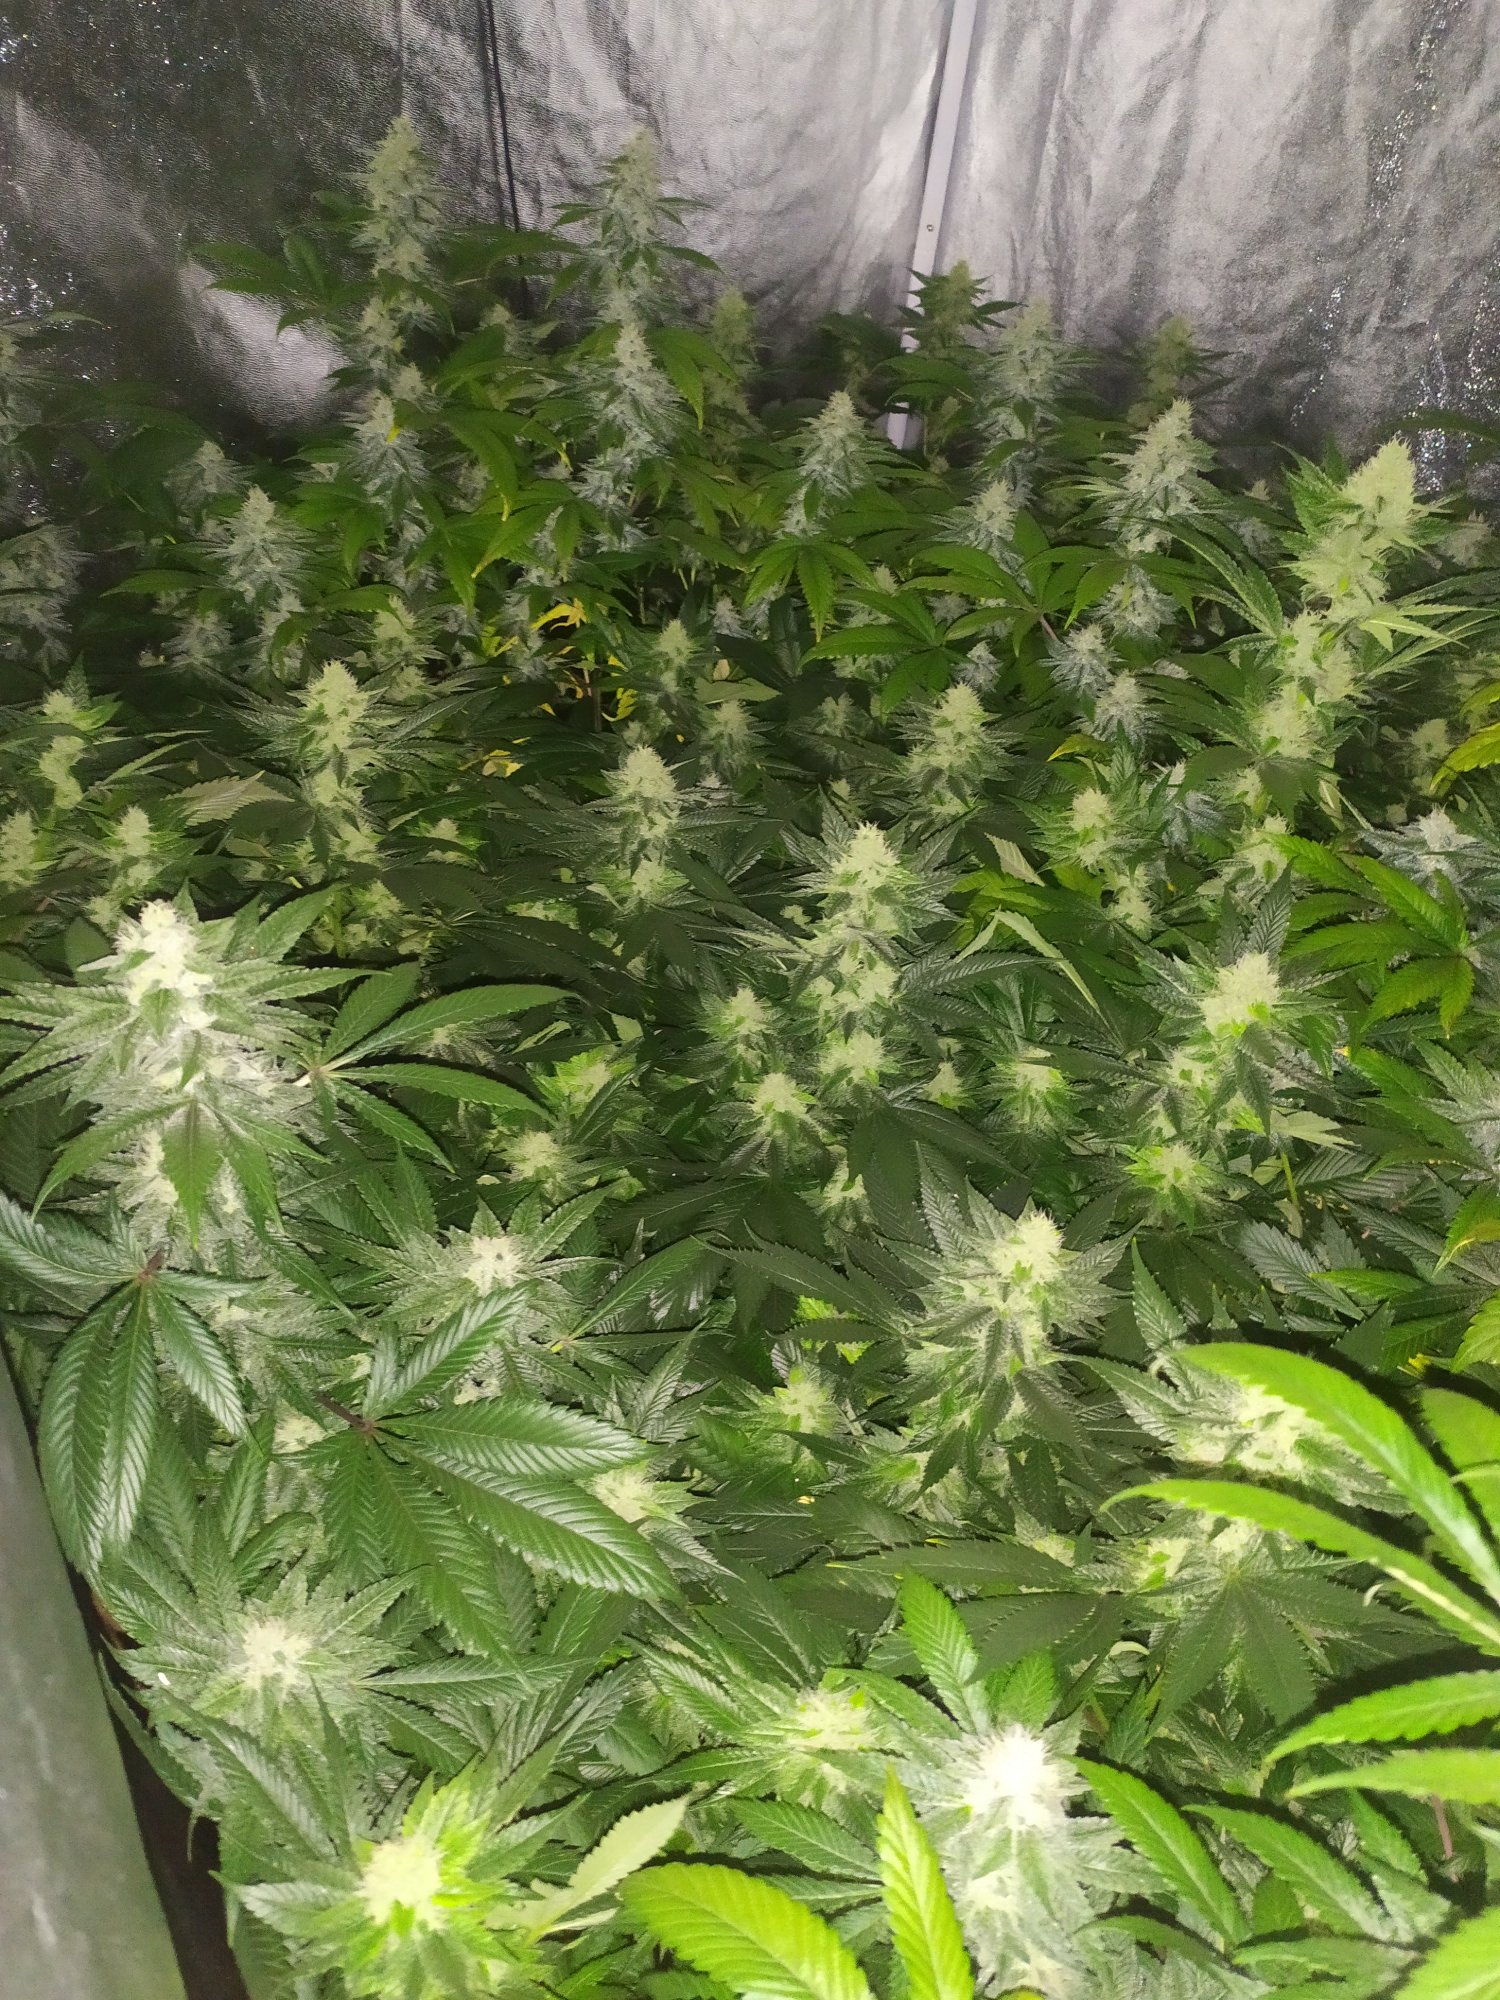 Tips for growing the original gg4 cut 3